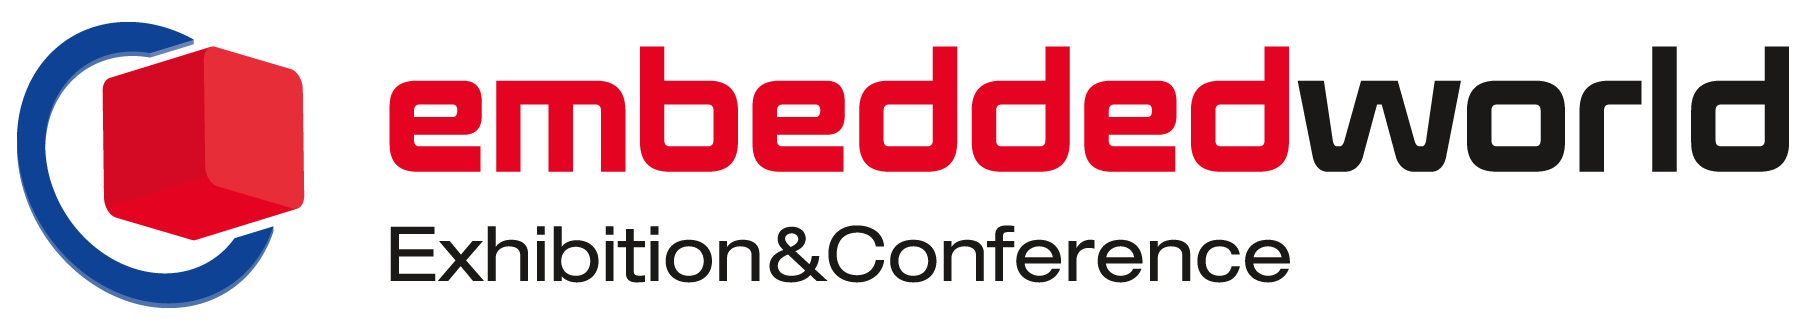 Embedded World 2025 - Exhibition & Conference